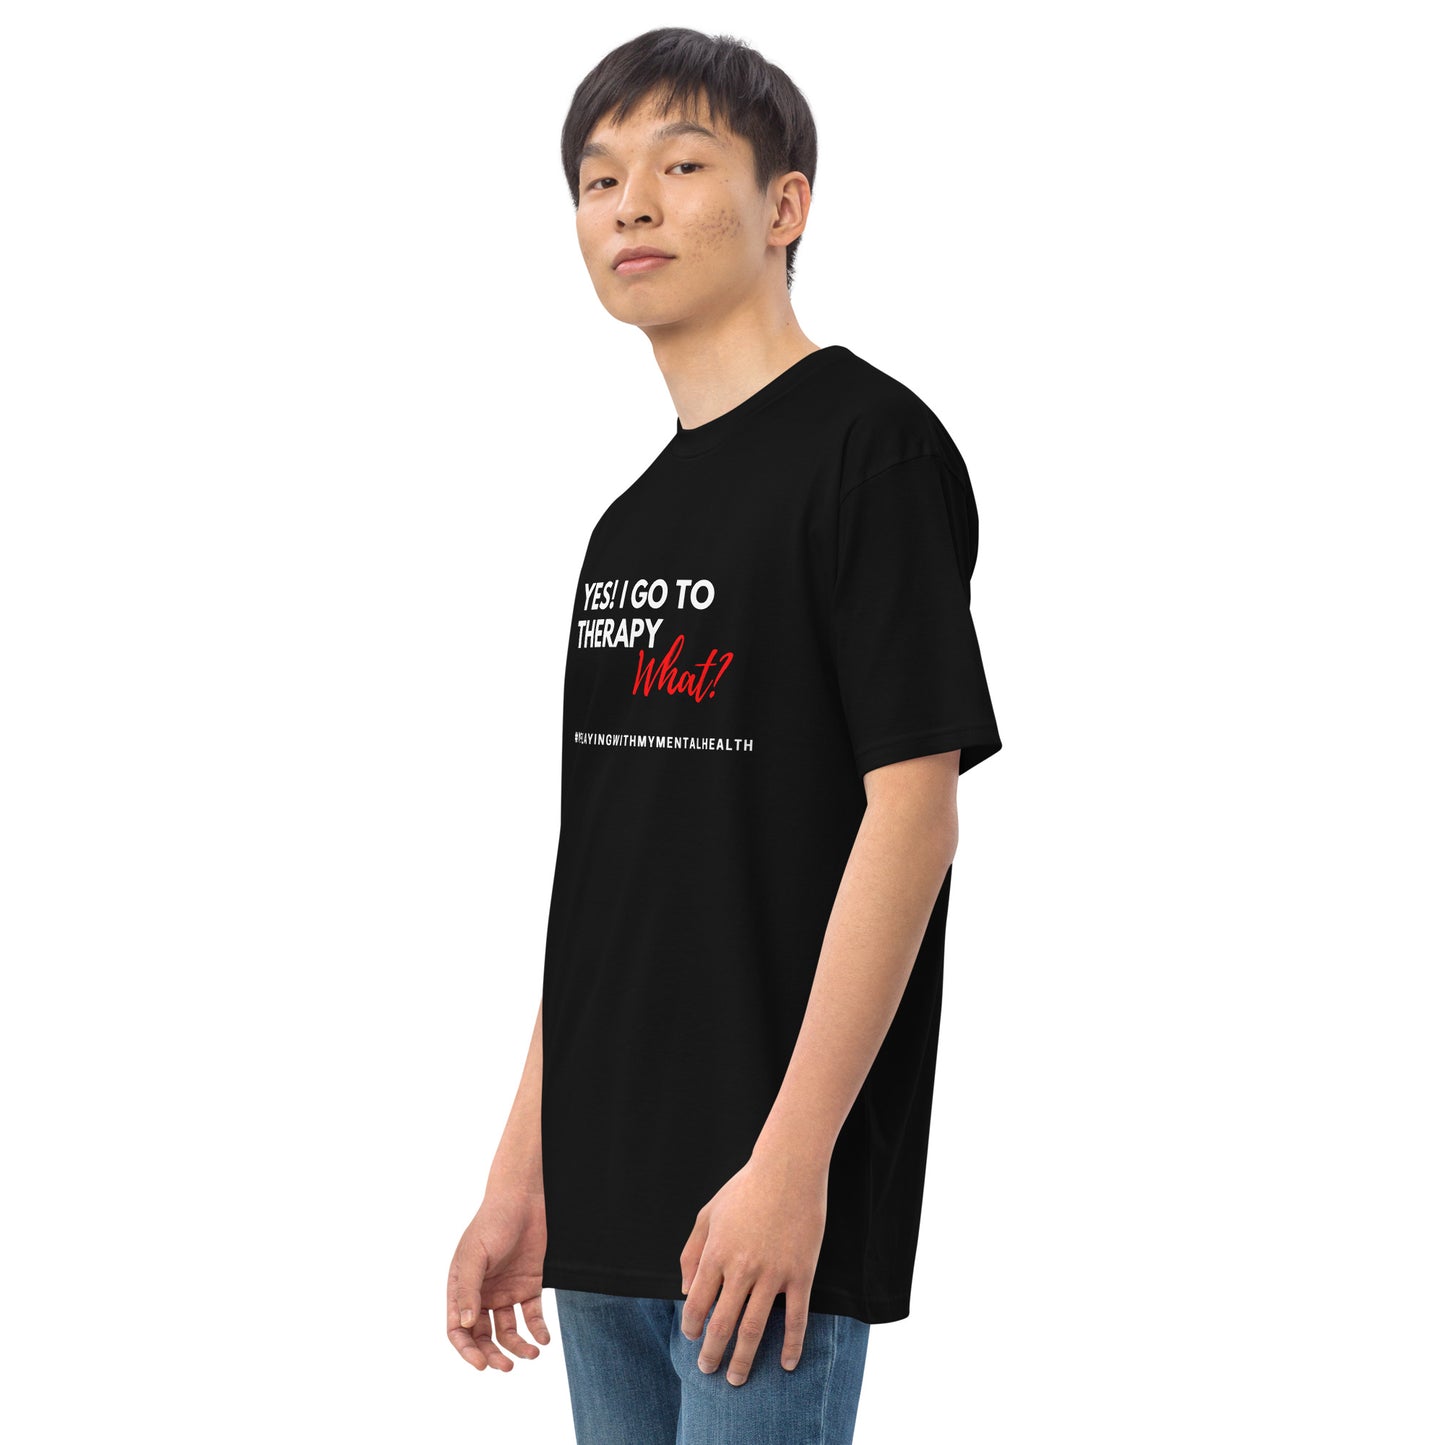 I Go to Therapy Men's Tee